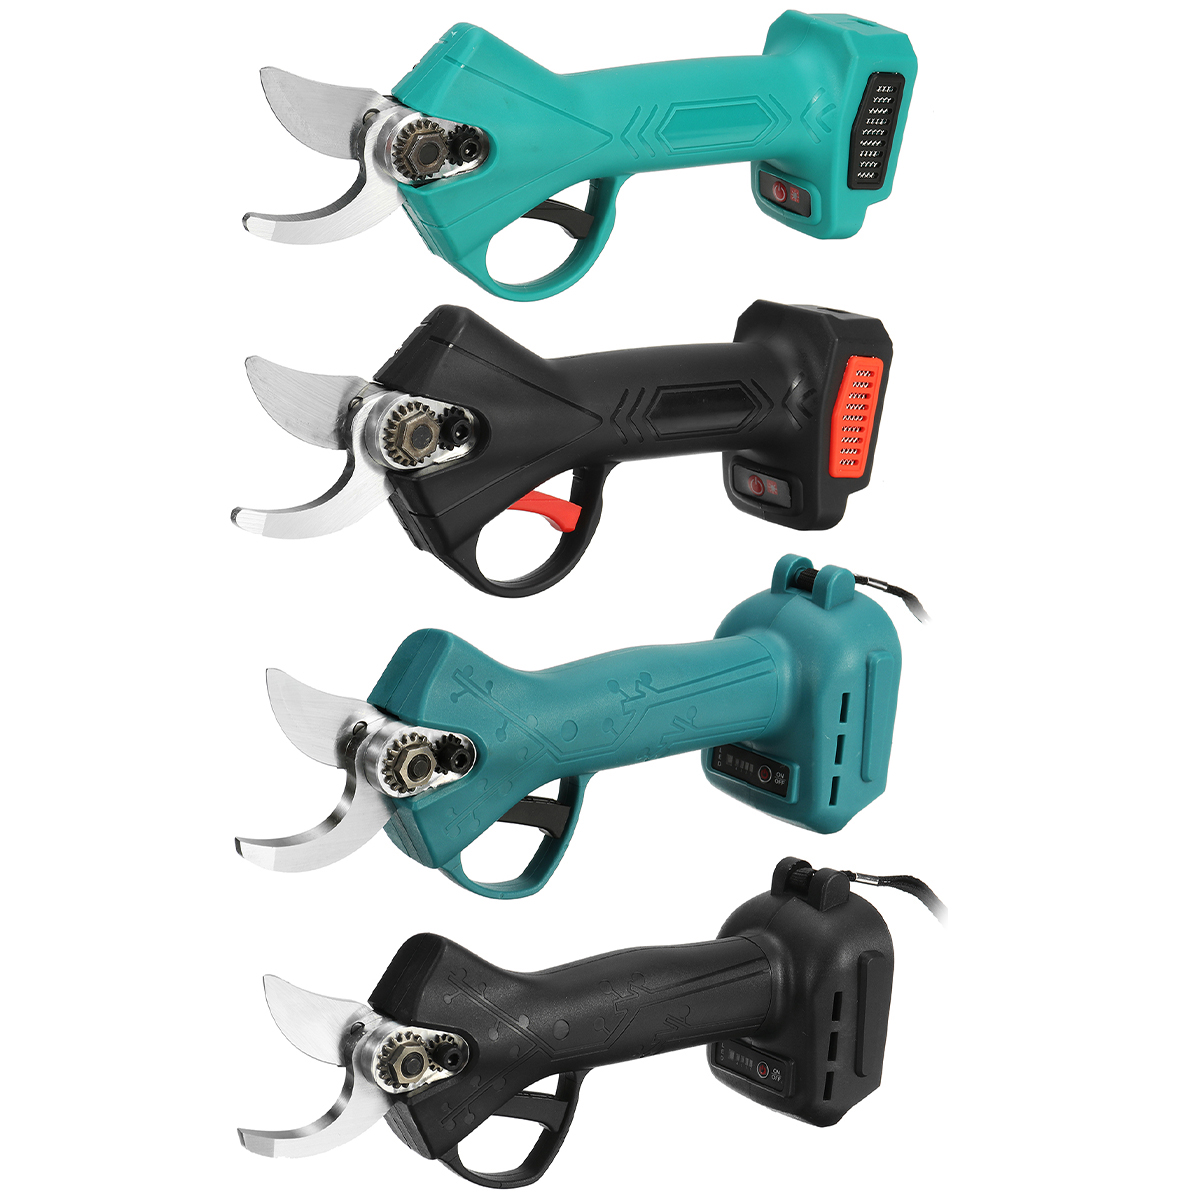 2530mm-Cordless-Electric-Branch-Scissors-Shear-Pruning-Cutter-Tool-Trimmer-For-WorxMakita-18V-21V-Ba-1816478-13